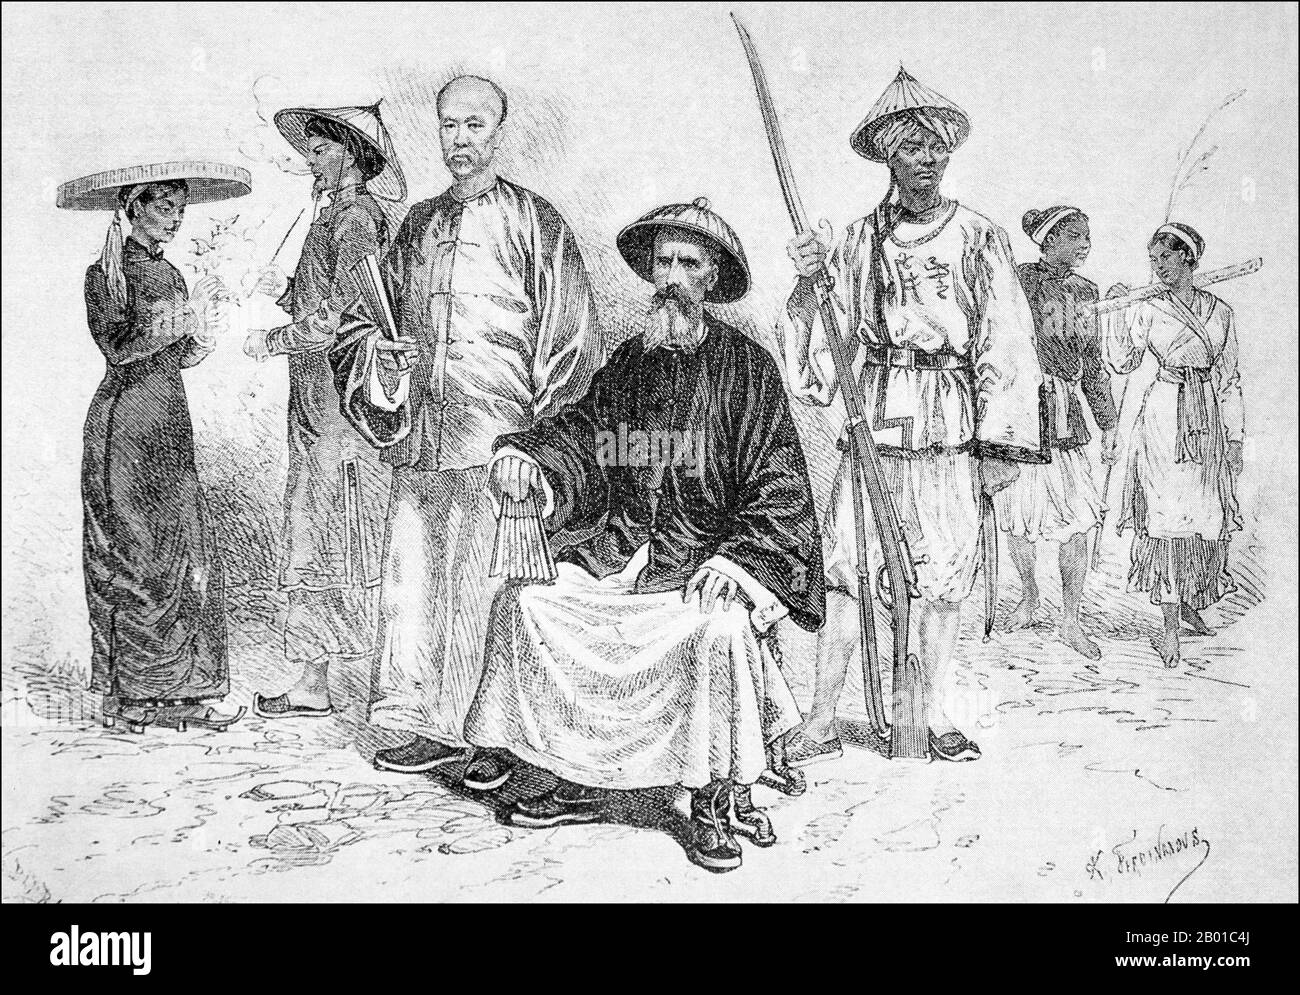 Vietnam: Jean Dupuis (7 December 1829 - 28 November 1912), French adventurer, trader, and arms dealer. Illustration by Alexandre Ferdinandus (2 March 1850 - 8 November 1888), 1873.  Left to Right: Woman and man of the Tonkinese wealthy class; Li Yu-tche, a Chinese mandarin travelling with Dupuis; Dupuis in Chinese dress; a Yunnanese soldier of Dupuis' escort; man and woman of 'the people' of Tonkin - i.e., not of the wealthy class.  Jean Dupuis was a French trader and explorer, known in Vietnam as Do Pho Nghia. He convinced to Francis Garnier to capture Hanoi and conquer the Tonkin region. Stock Photo